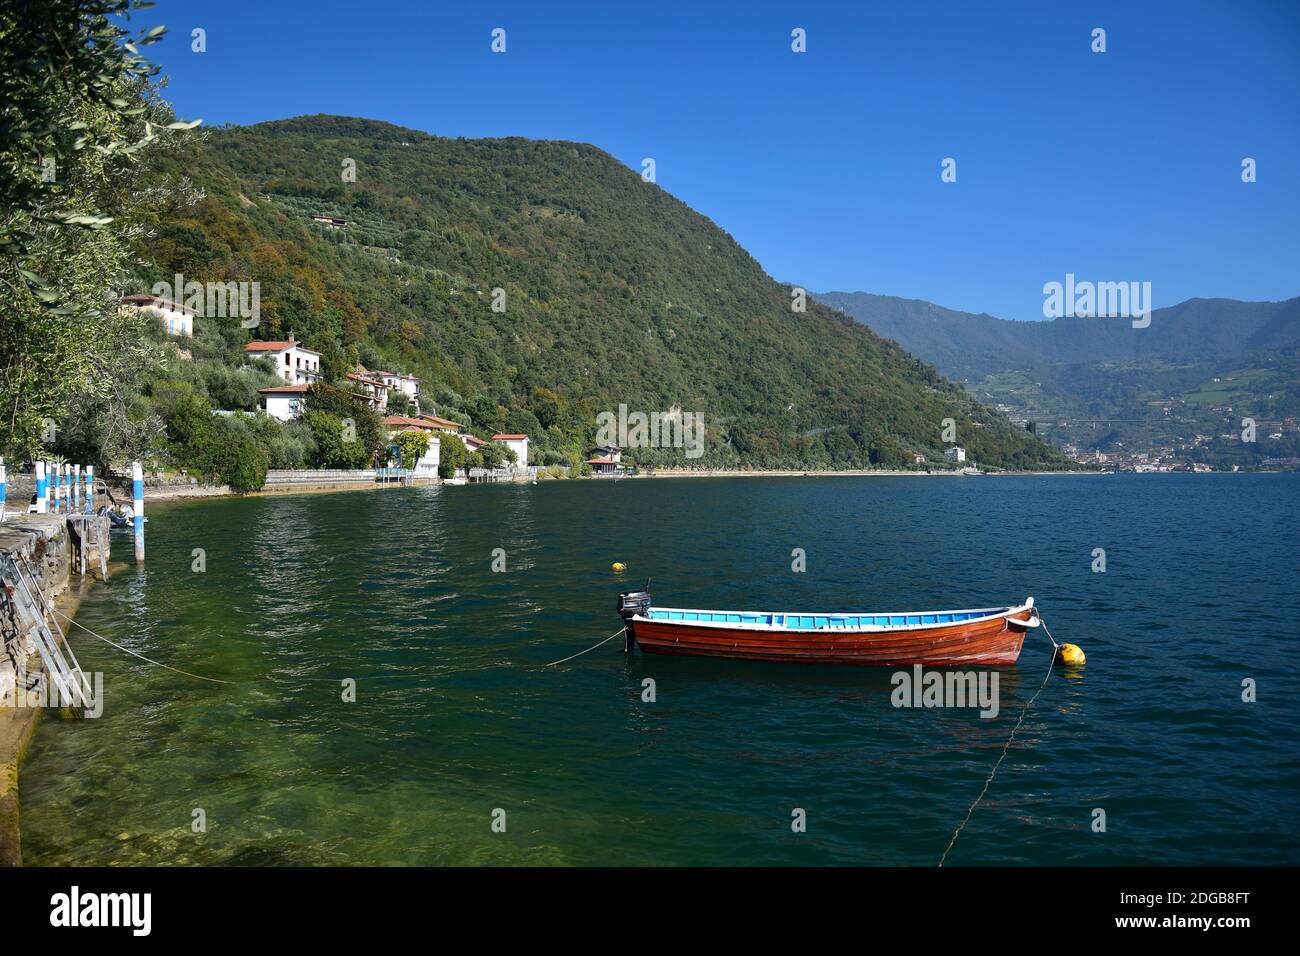 A boat in Lake Iseo. Monte Isola, Brescia, Lombardy, Italy. Stock Photo